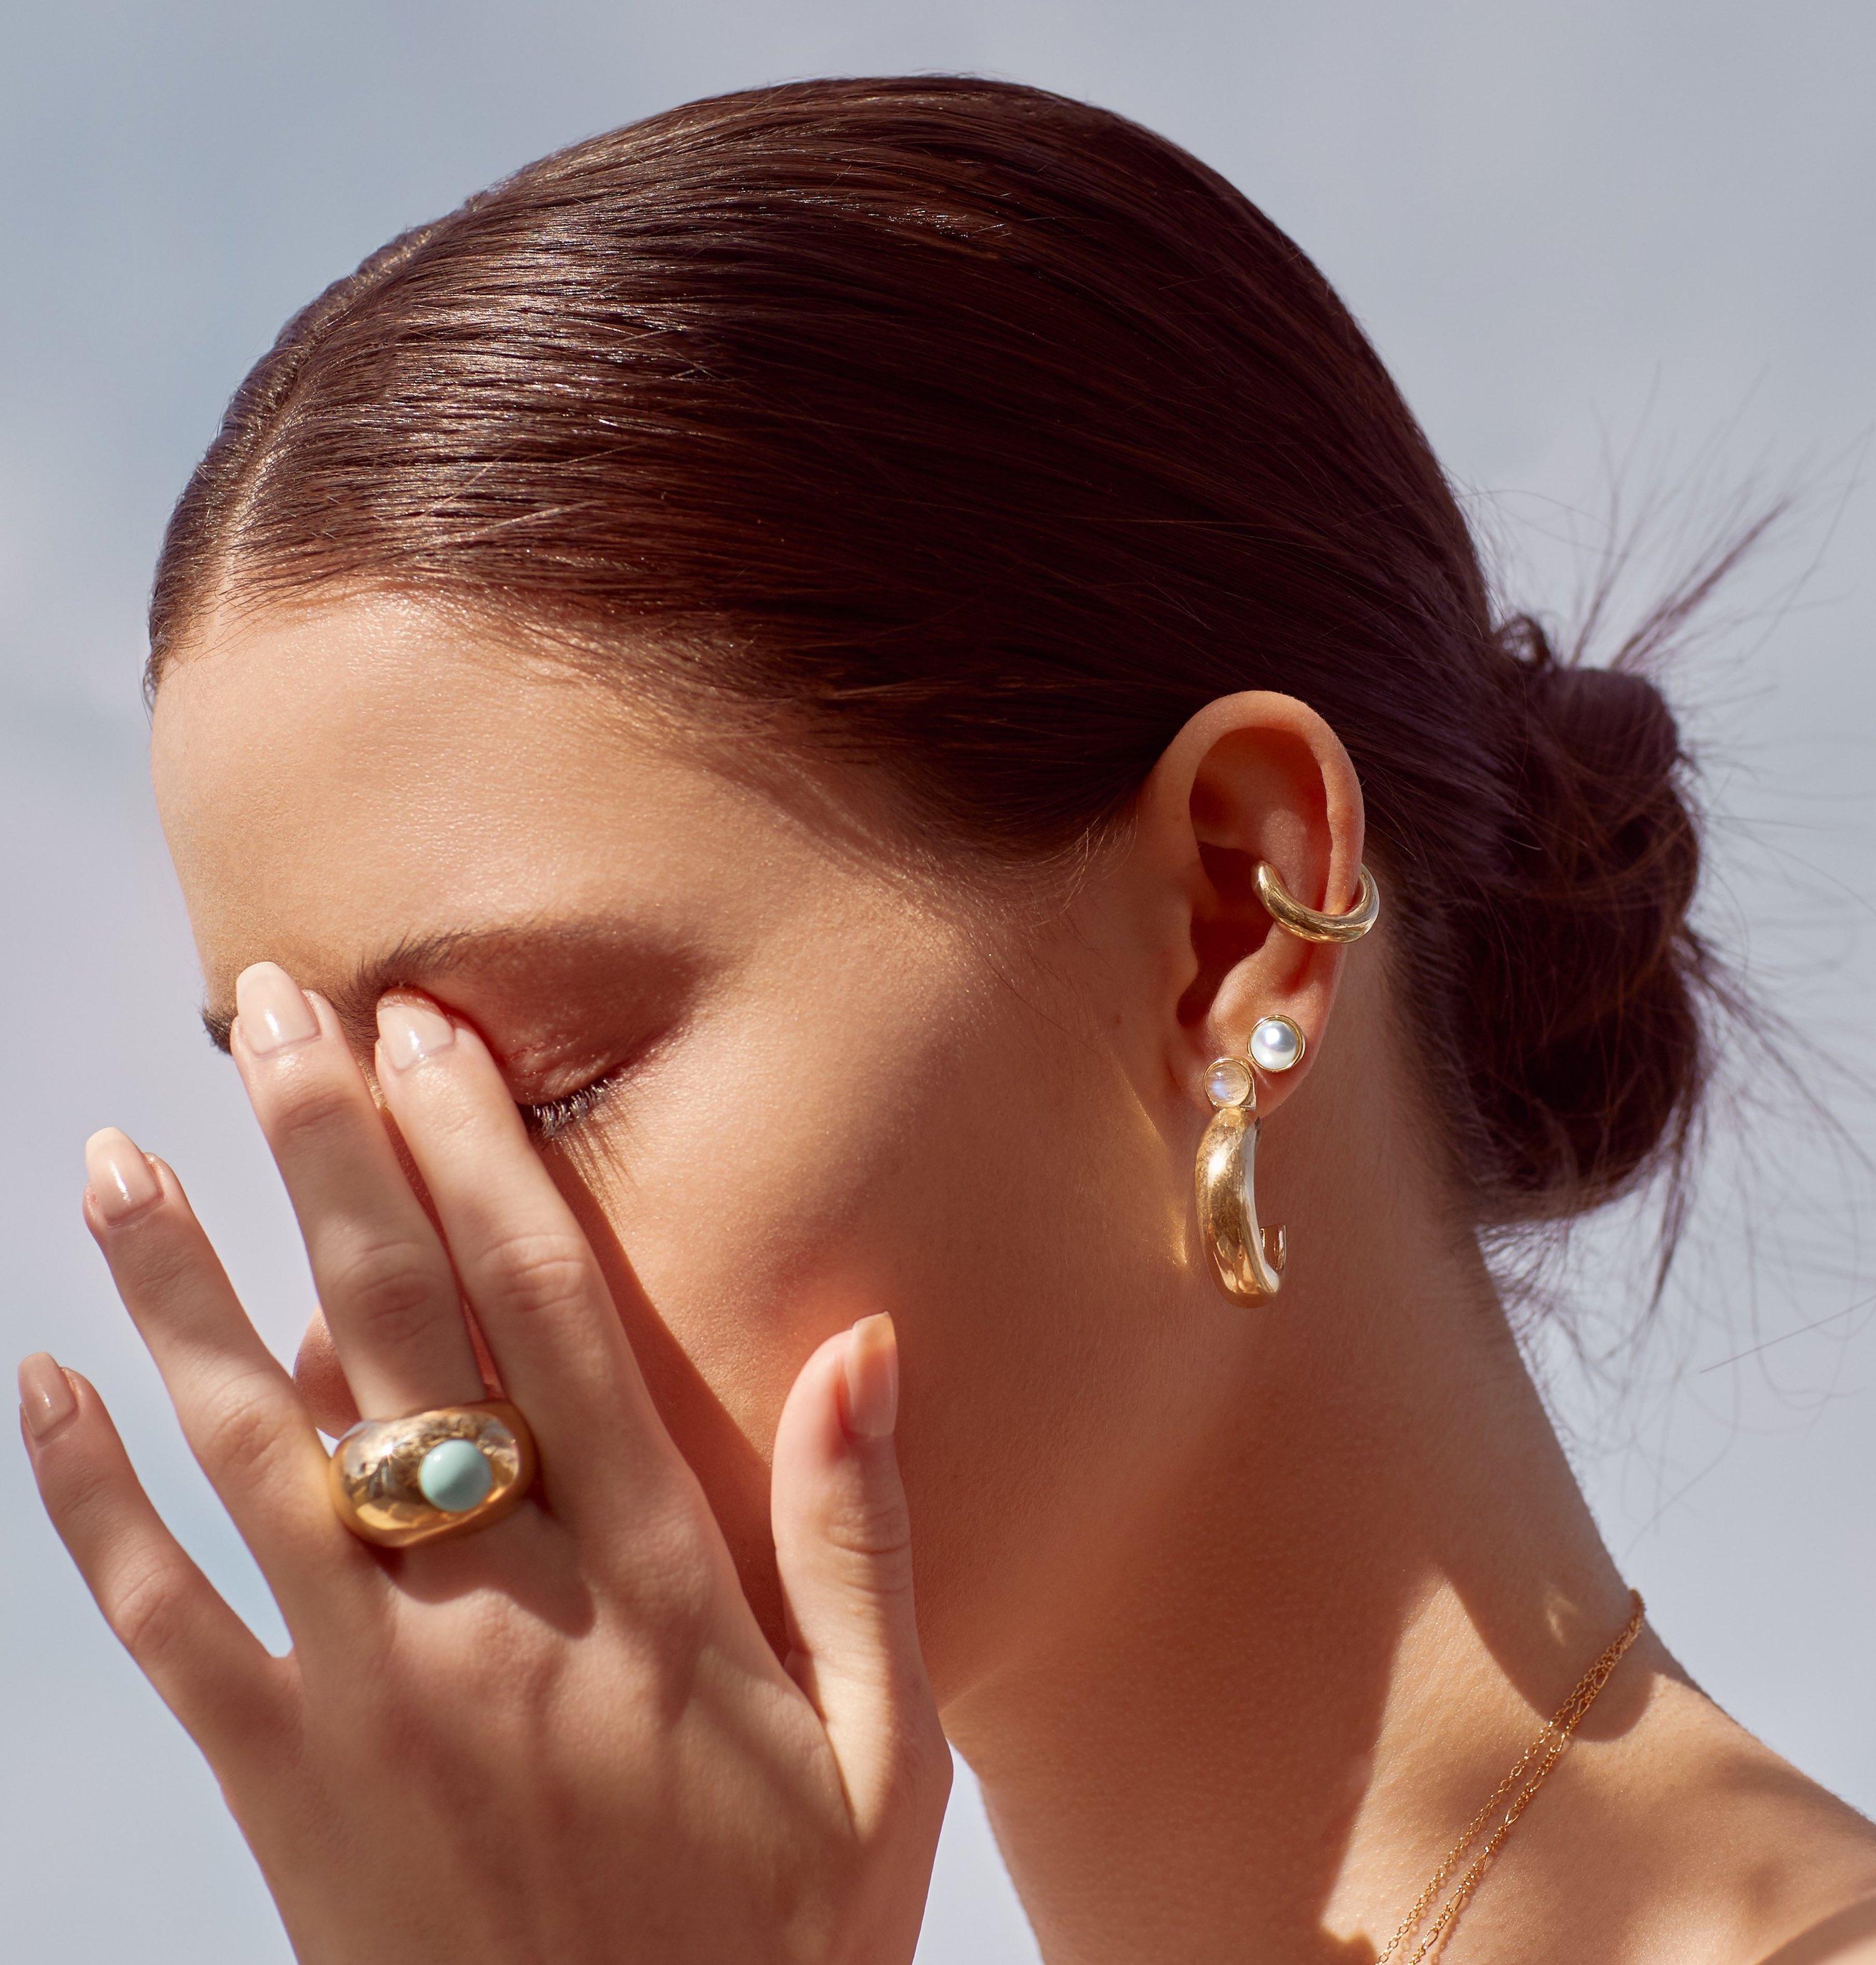 Vine stud earrings in 14K gold with bezel set Freshwater pearls.
A perfect everyday pair.
Each Jacqueline Rose piece is handcrafted in Los Angeles.
